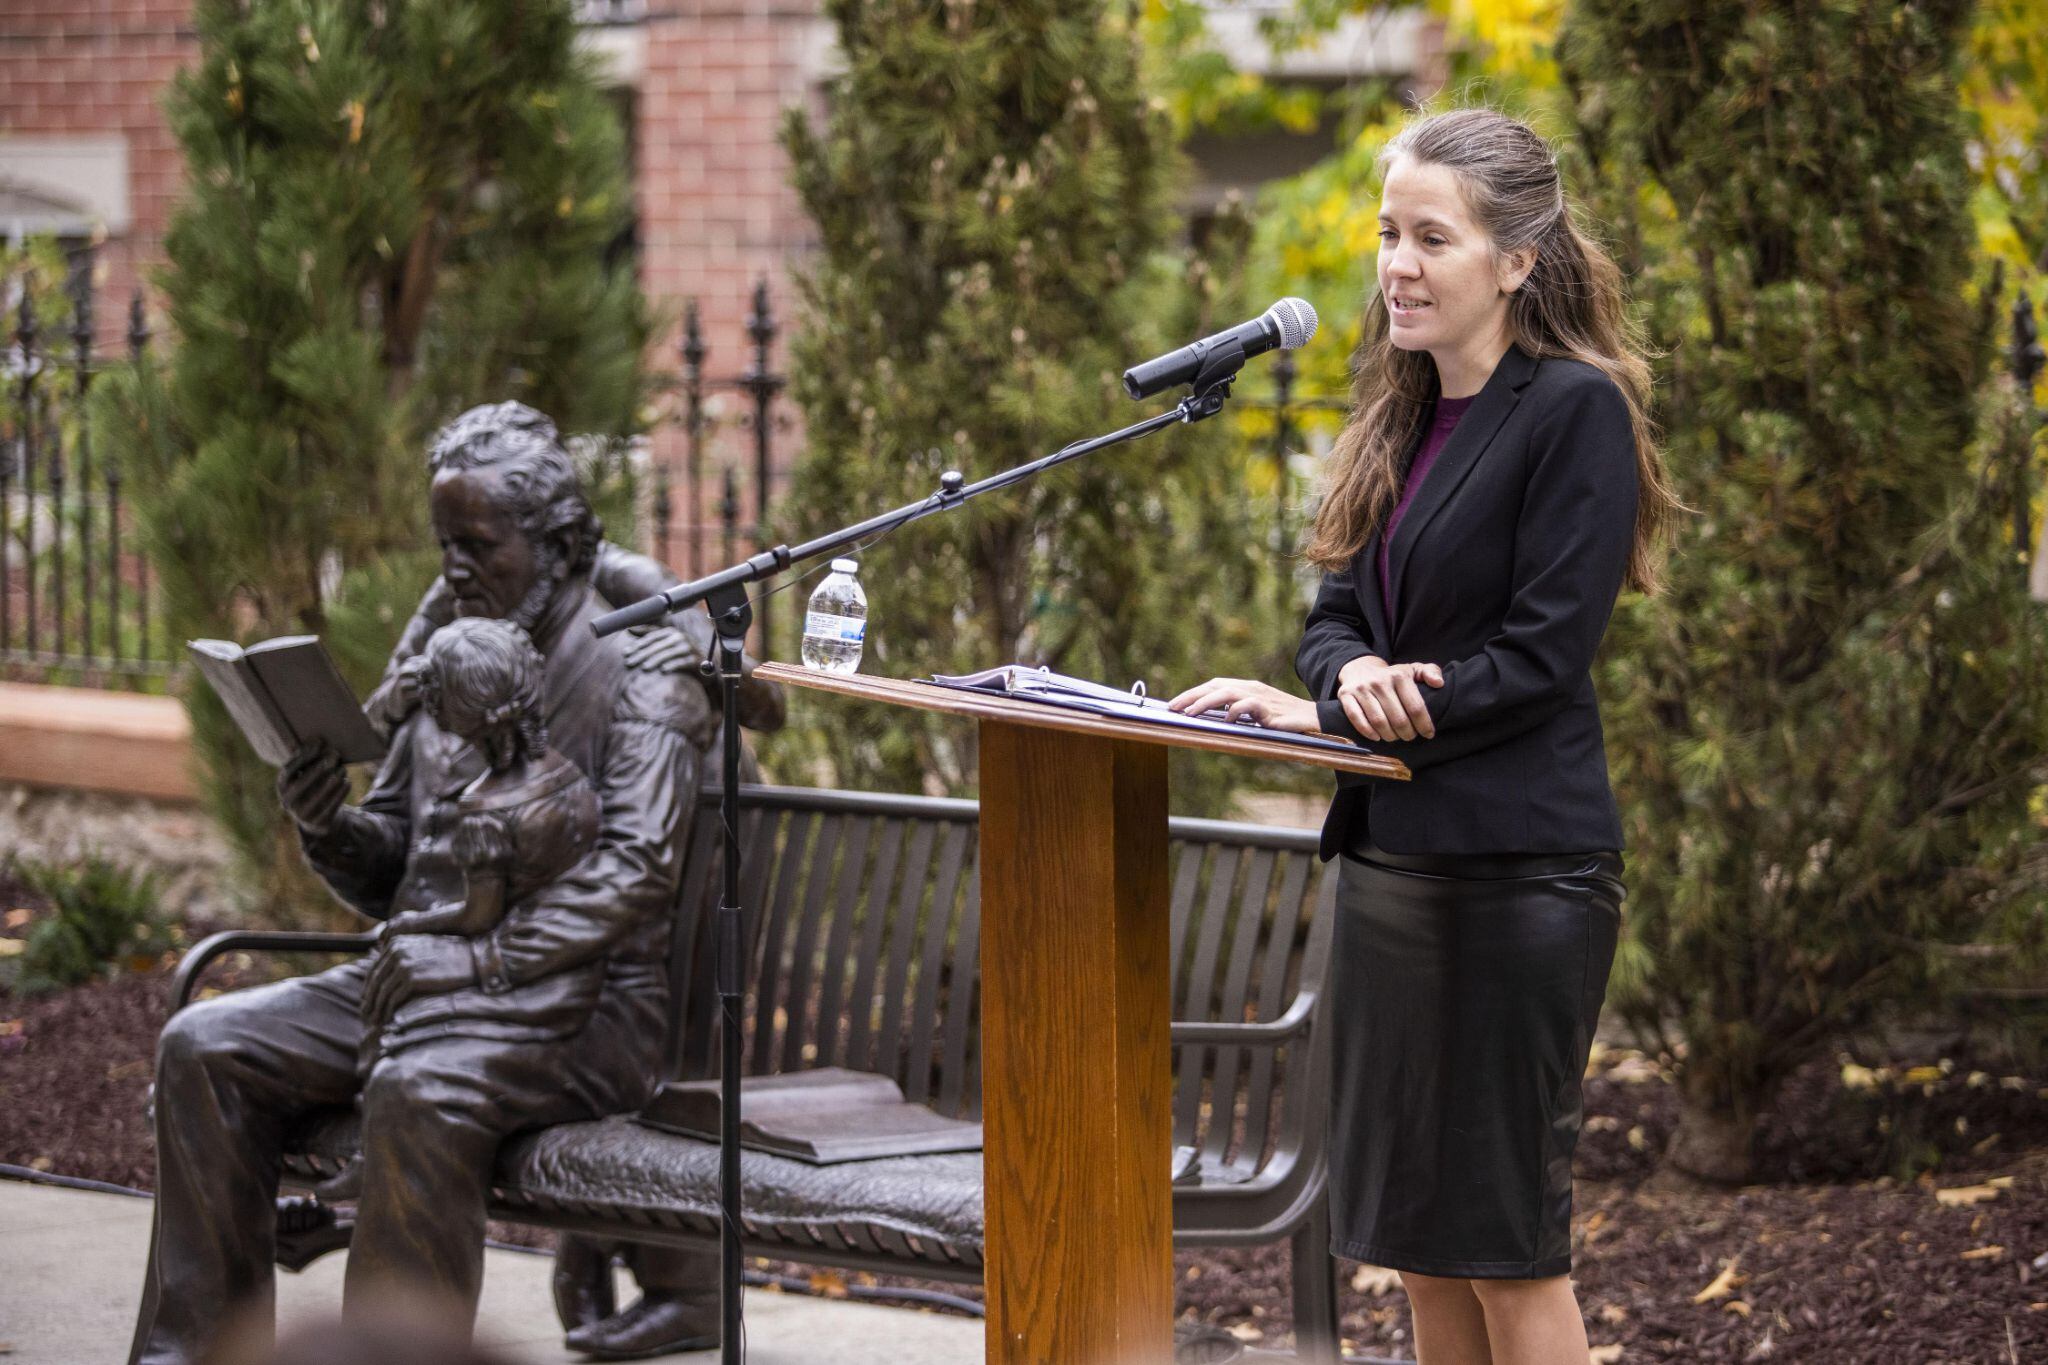 (The Church of Jesus Christ of Latter-day Saints)
Emily Utt, curator of church historic sites, speaks at the rededication ceremony for the Brigham Young Family Cemetery in Salt Lake City in 2022. Utt has been key in the church's work at the Kirtland and Manti temples.